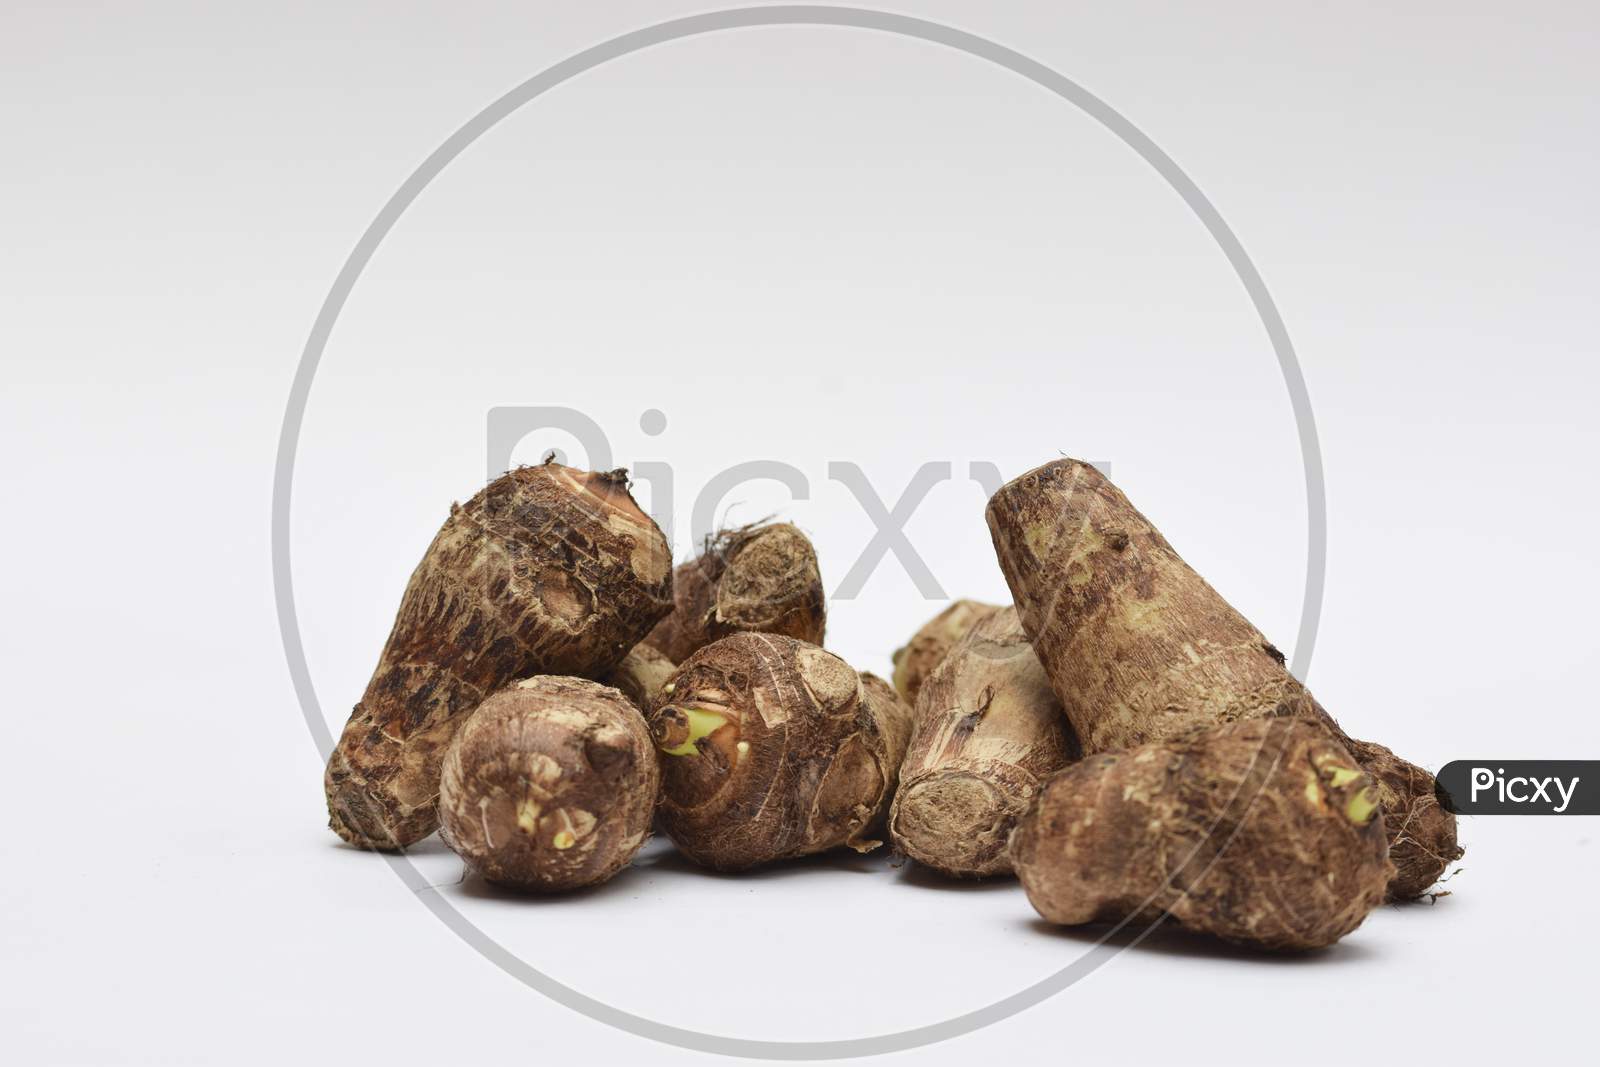 Whole Taro Root Or Colocasia Esculenta Raw Root Vegetable Also Known As Arbi In India On White Background